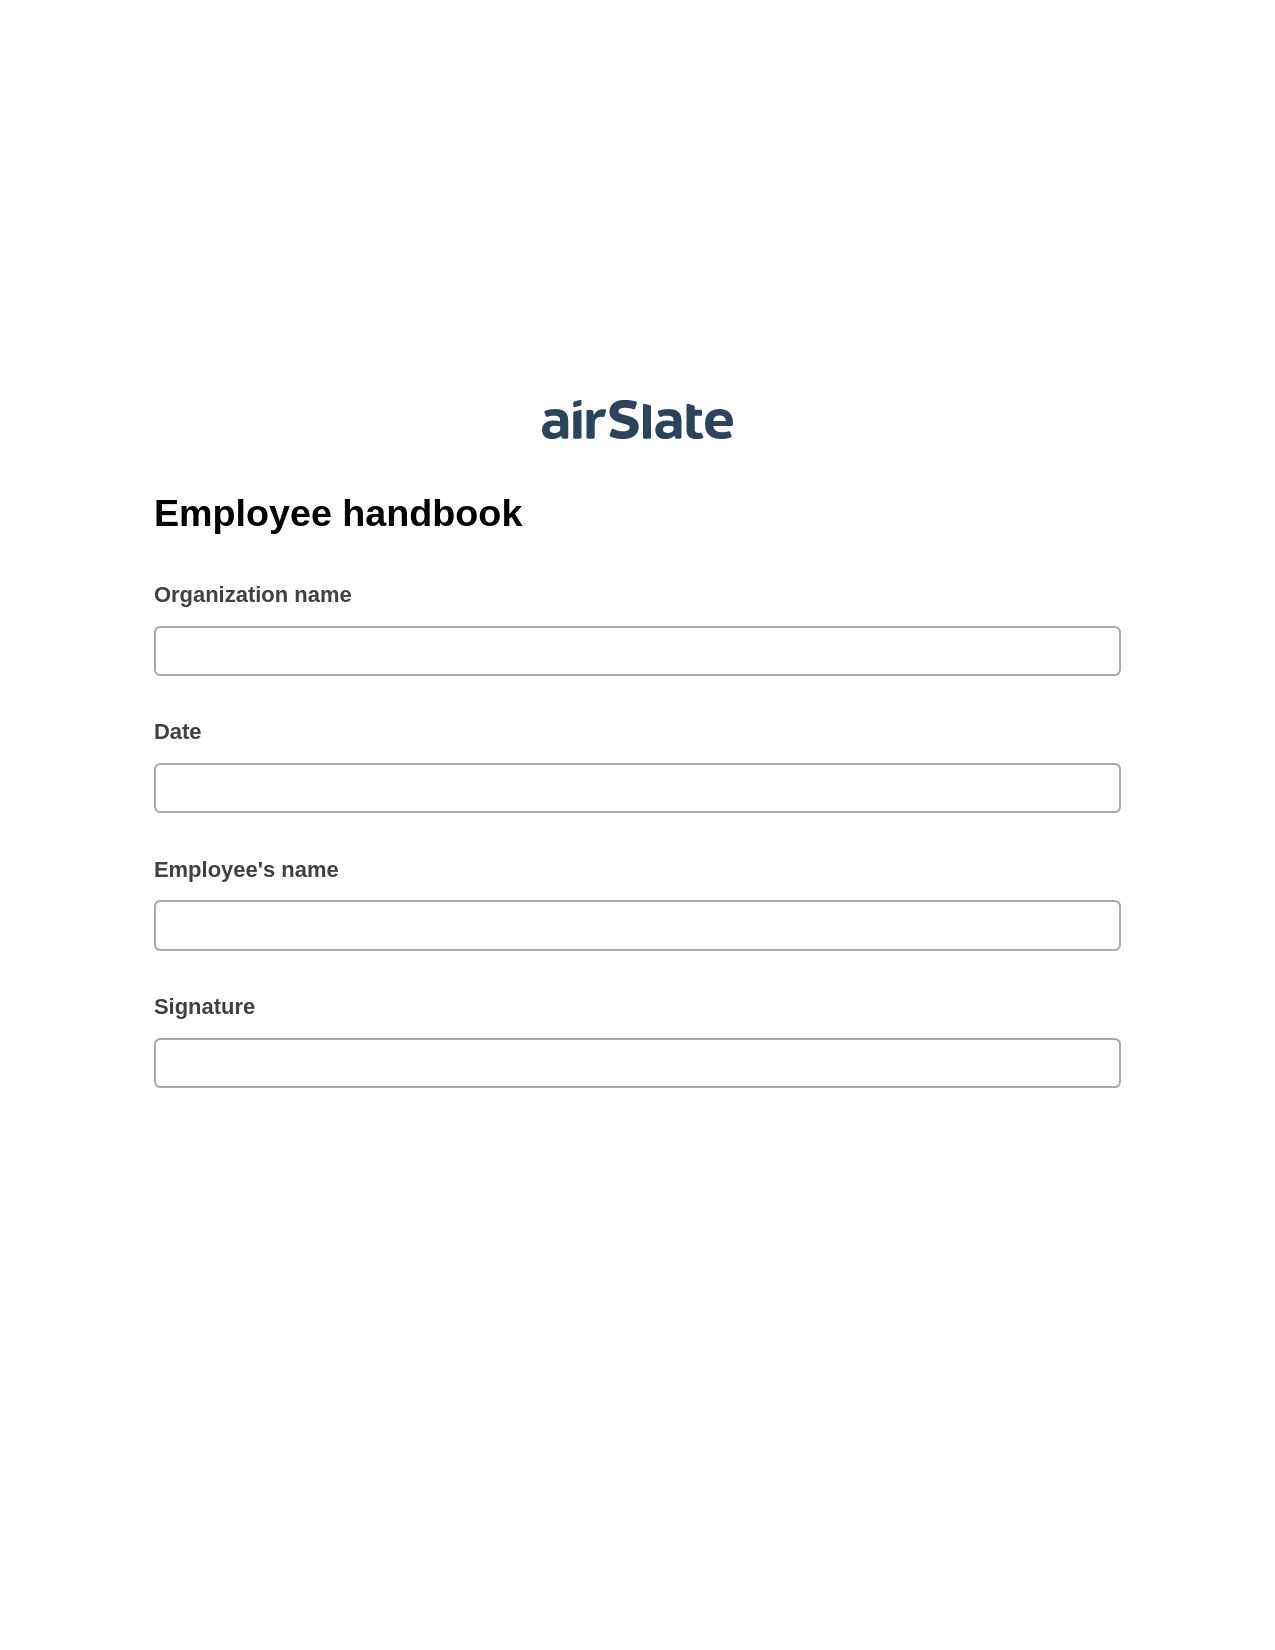 Employee handbook Pre-fill from Google Sheets Bot, Send Mailchimp Campaign Bot, Email Notification Postfinish Bot